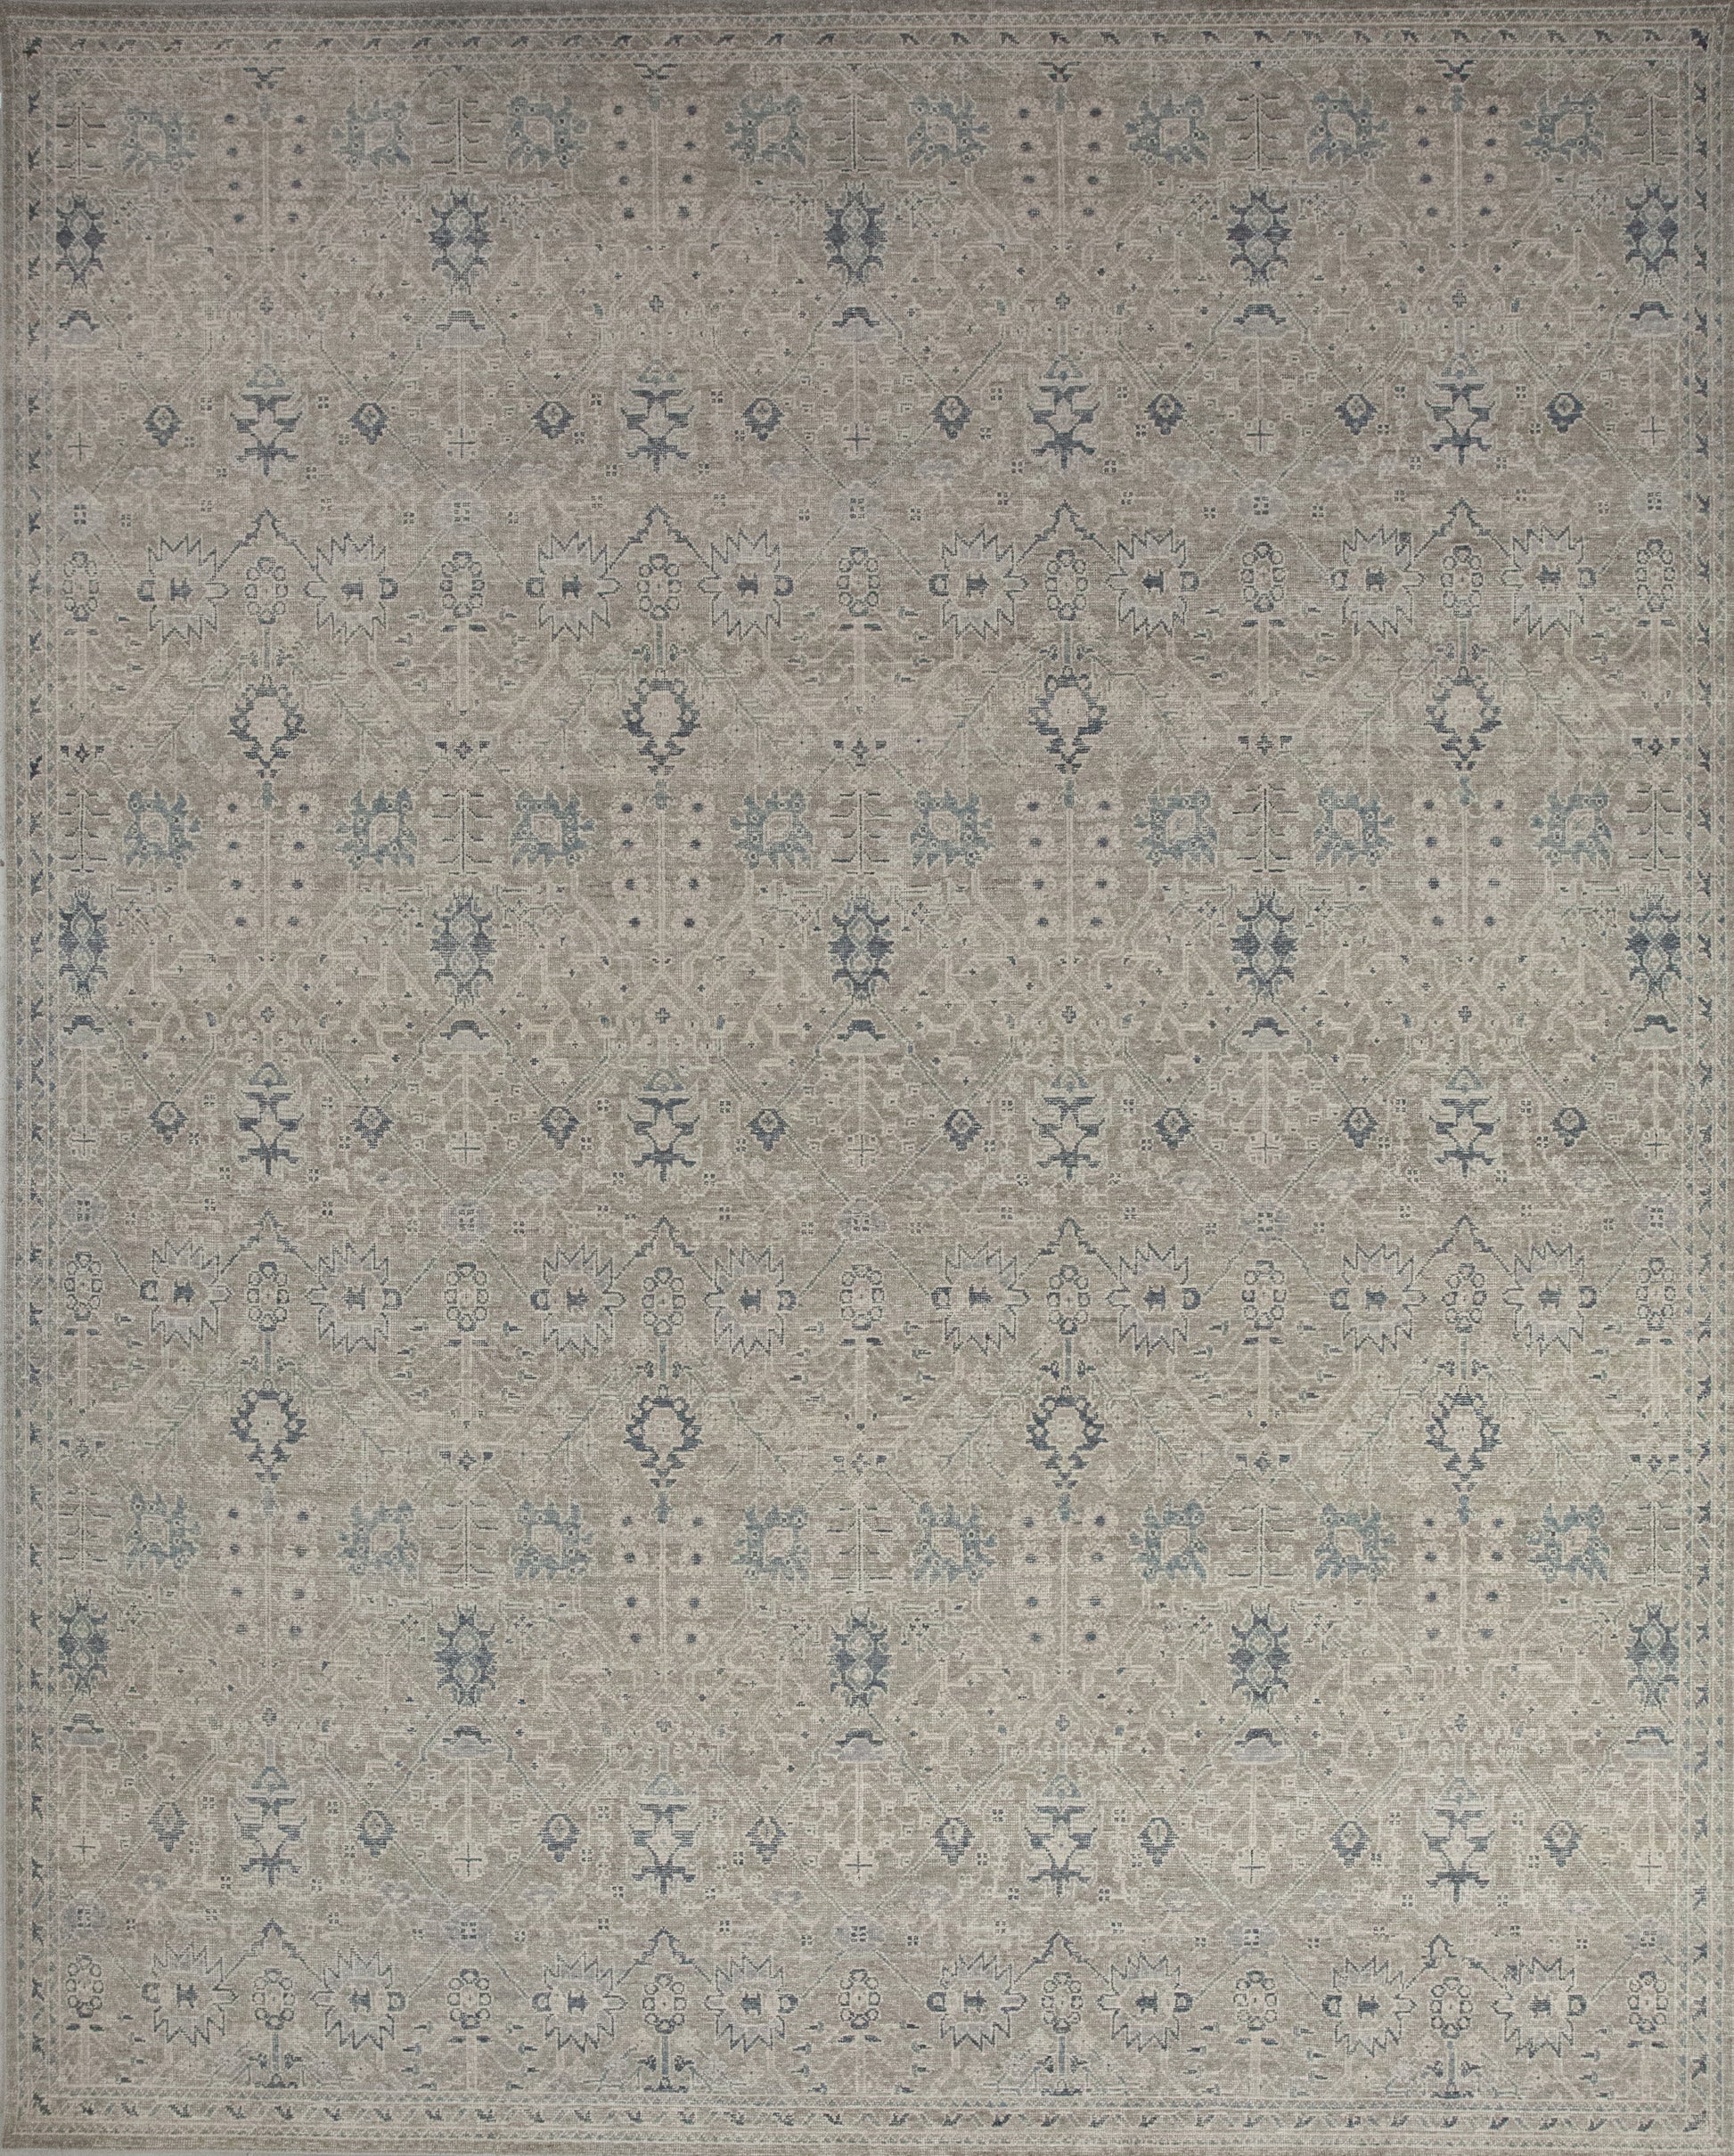 Vintage rug comes with a tranquil color scheme which has variations of beige and gray accents.